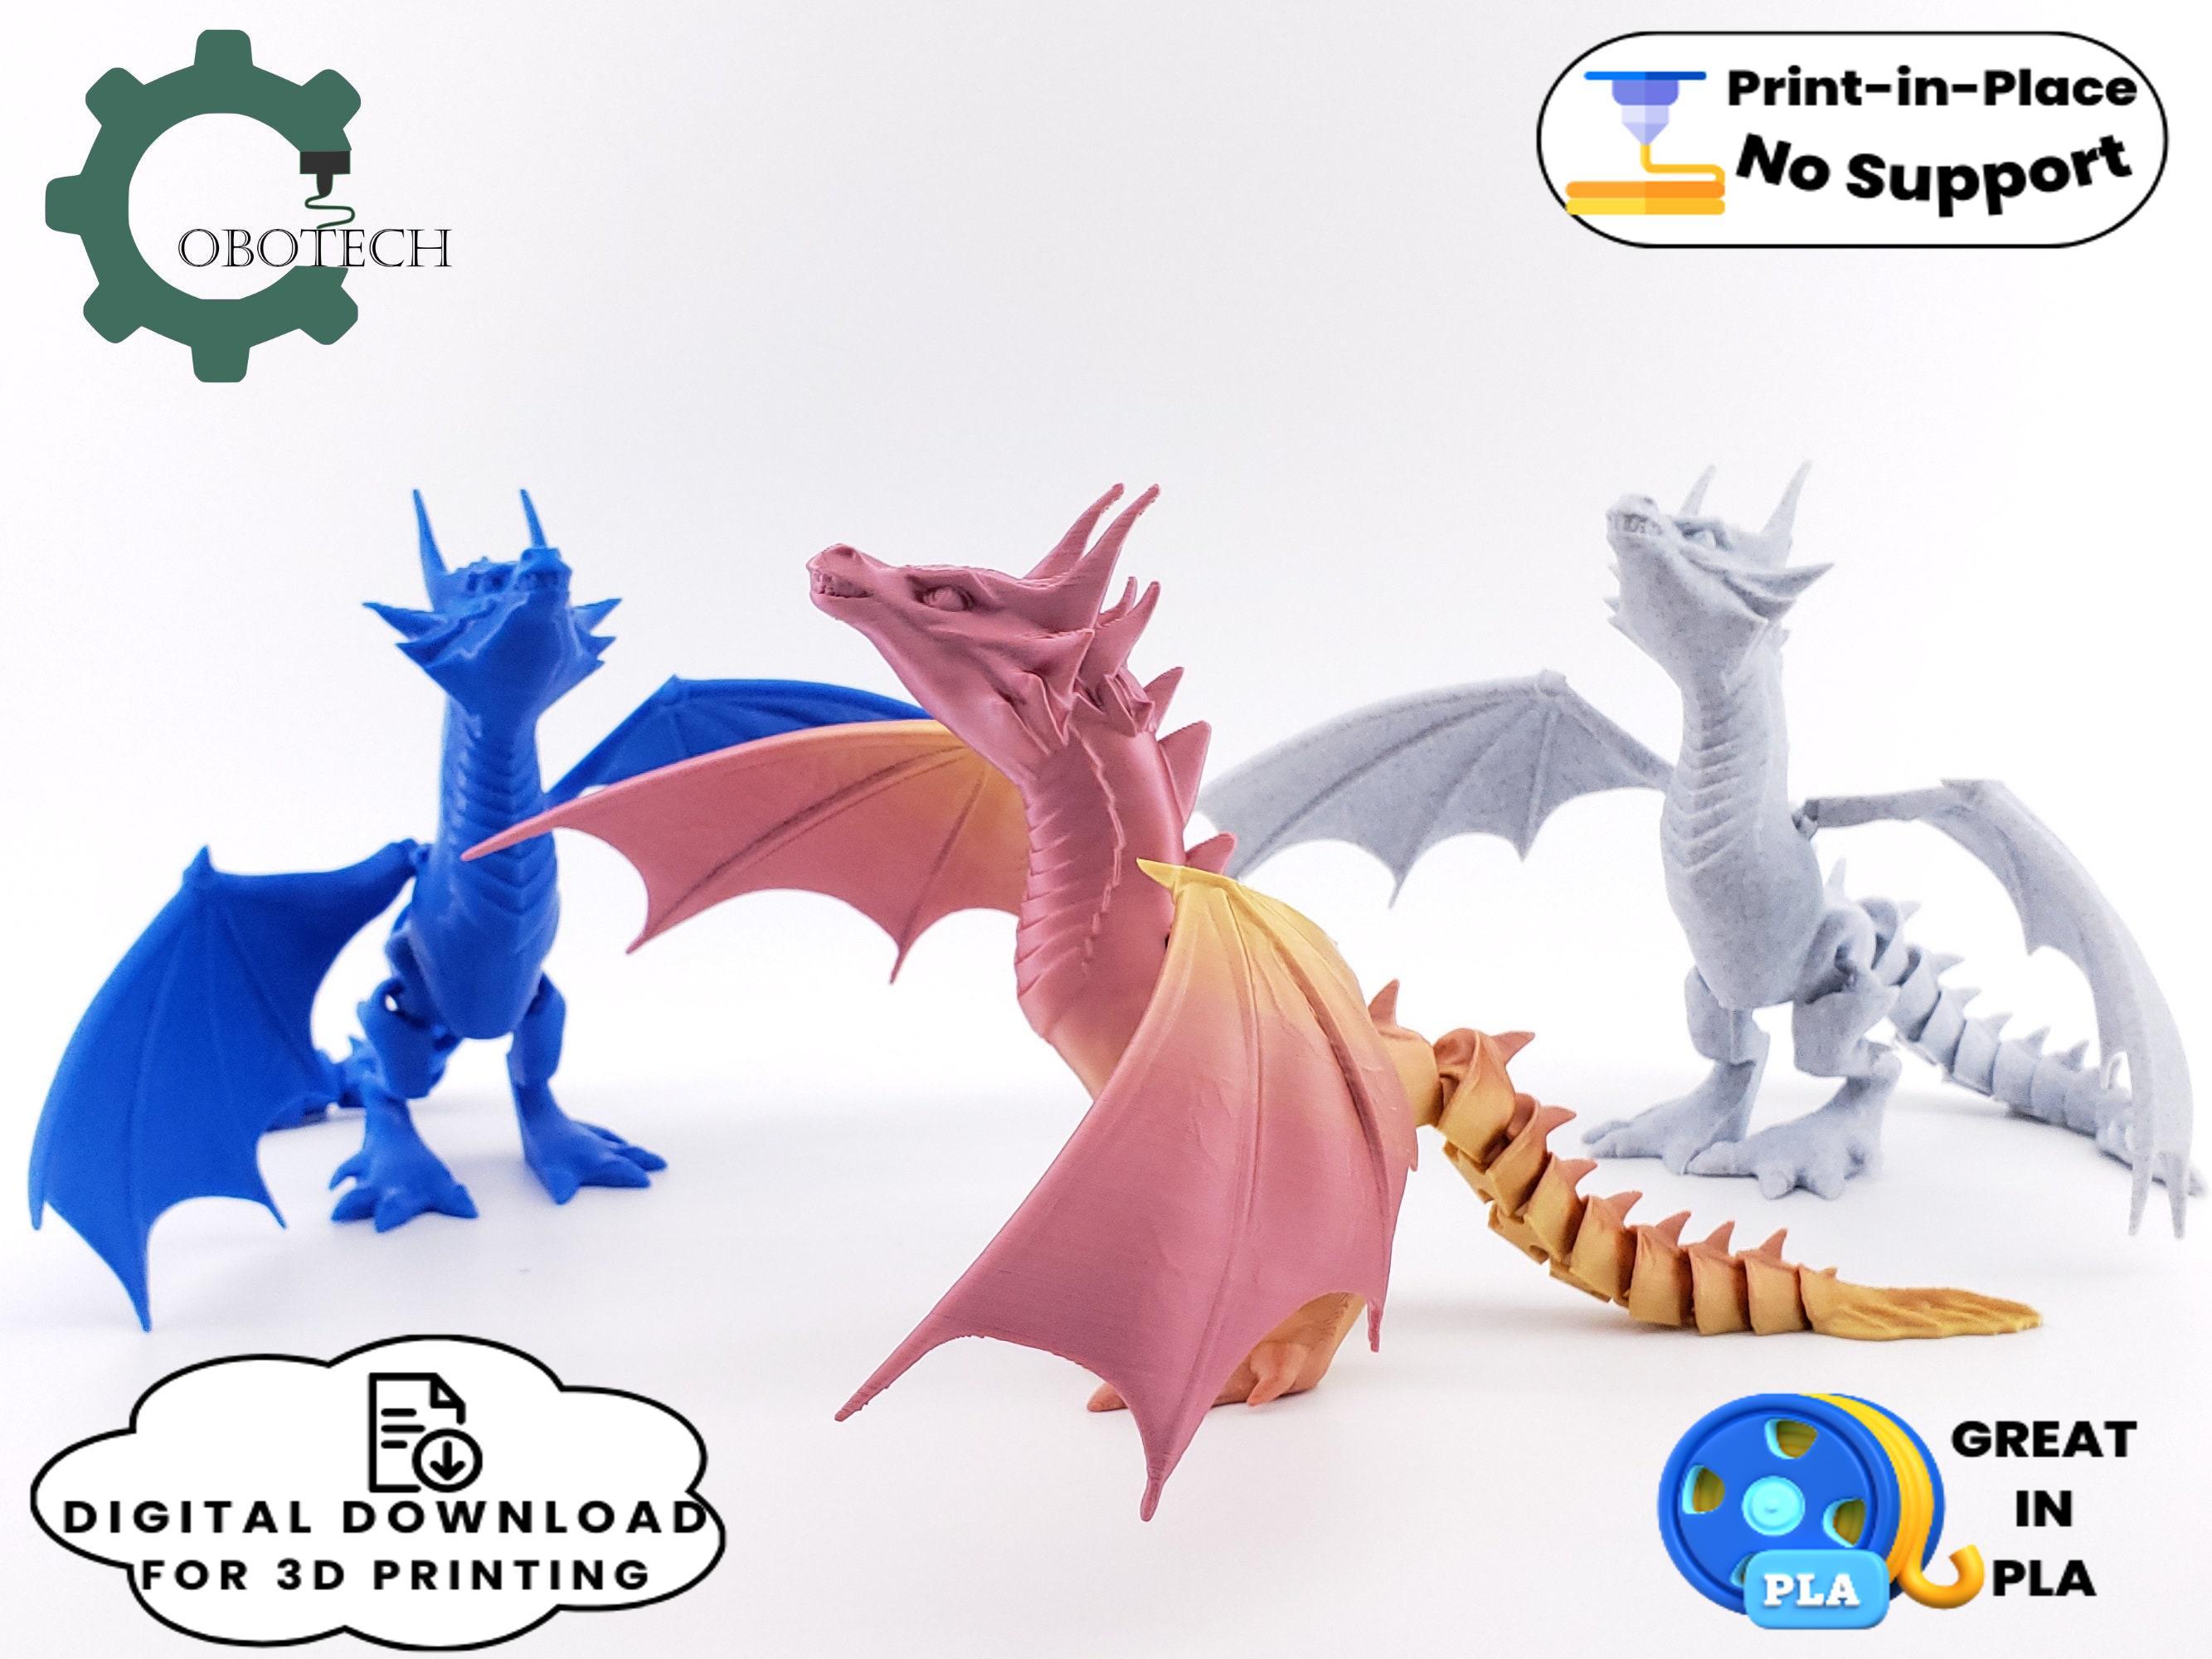 Cobotech Articulated Happy Dragon 3d model